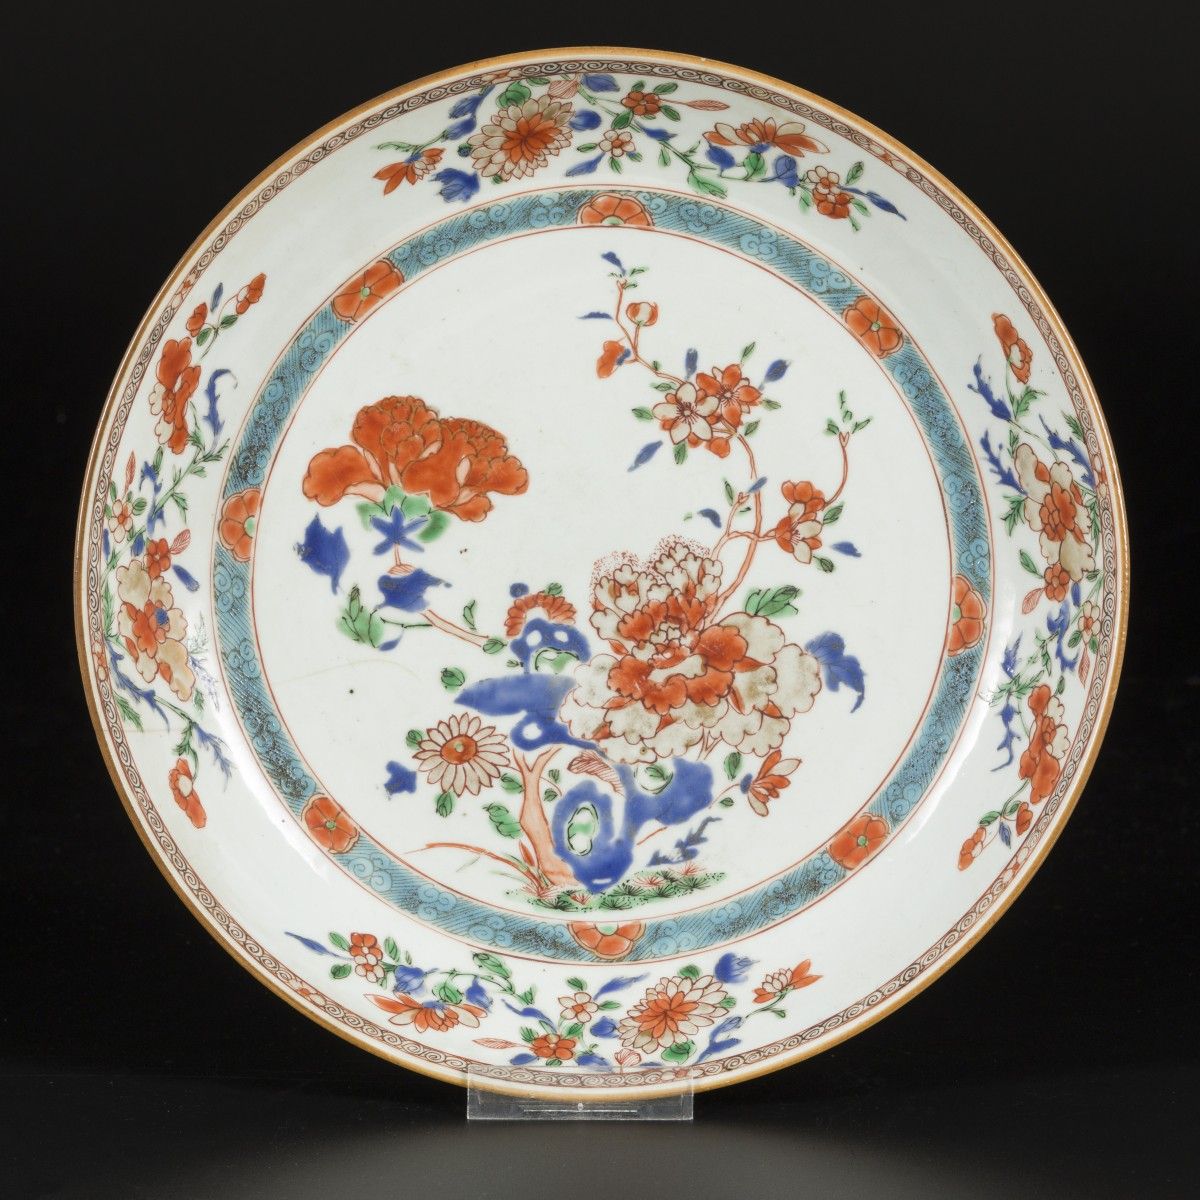 A porcelain charger with floral decorations, China, 18th century. Diam. 28 cm. E&hellip;